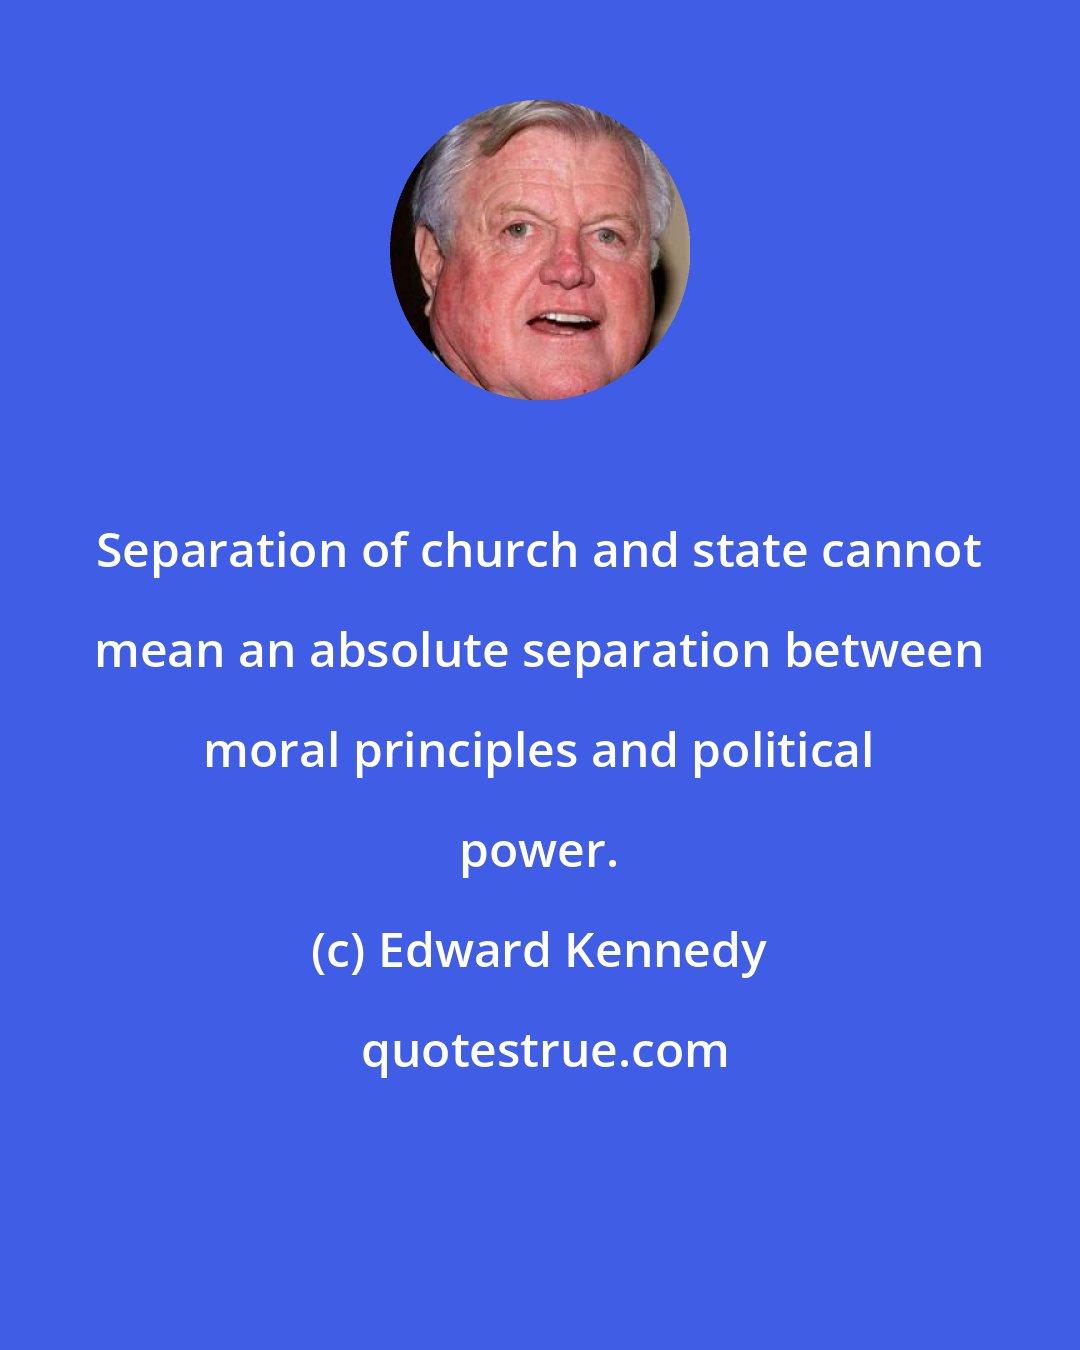 Edward Kennedy: Separation of church and state cannot mean an absolute separation between moral principles and political power.